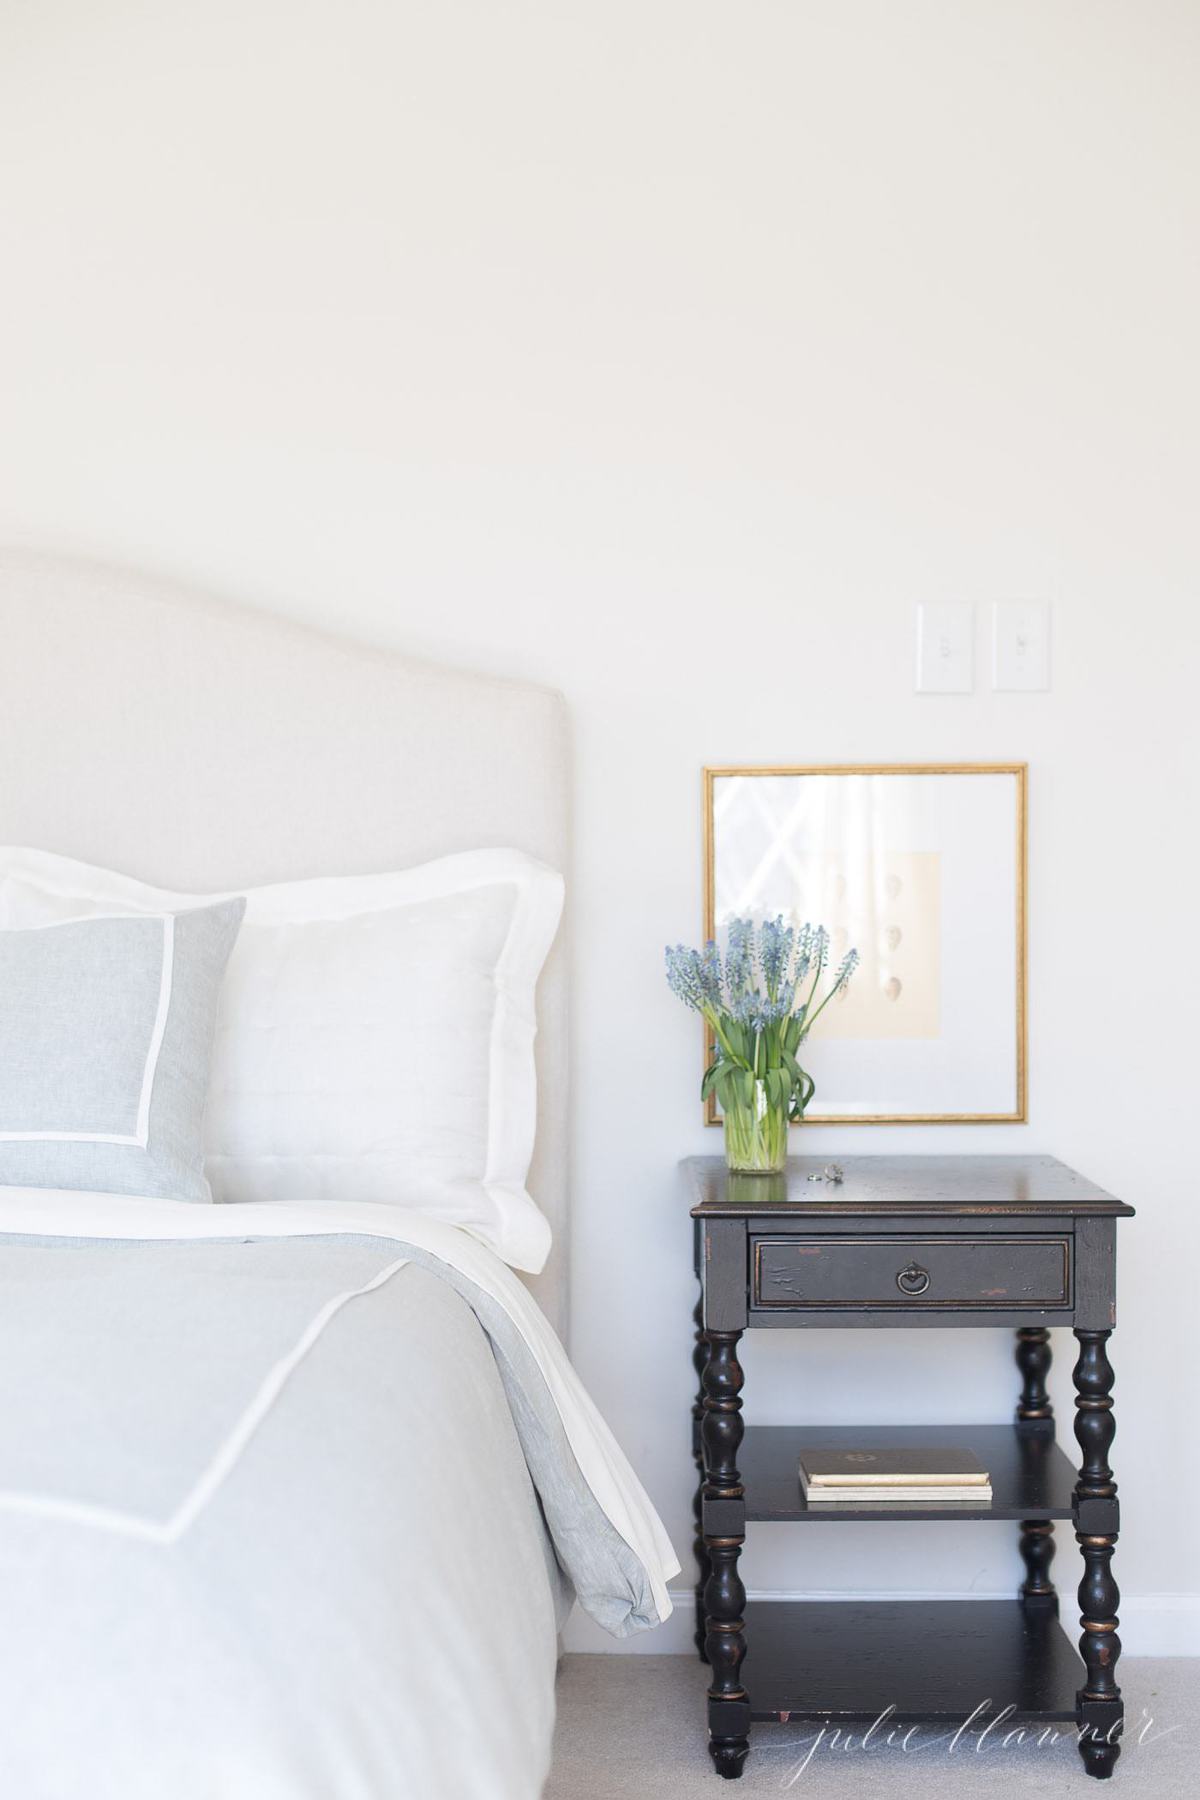 A white bedroom with an upholstered headboard and black nightstand, antique egg printable art over the nightstand.